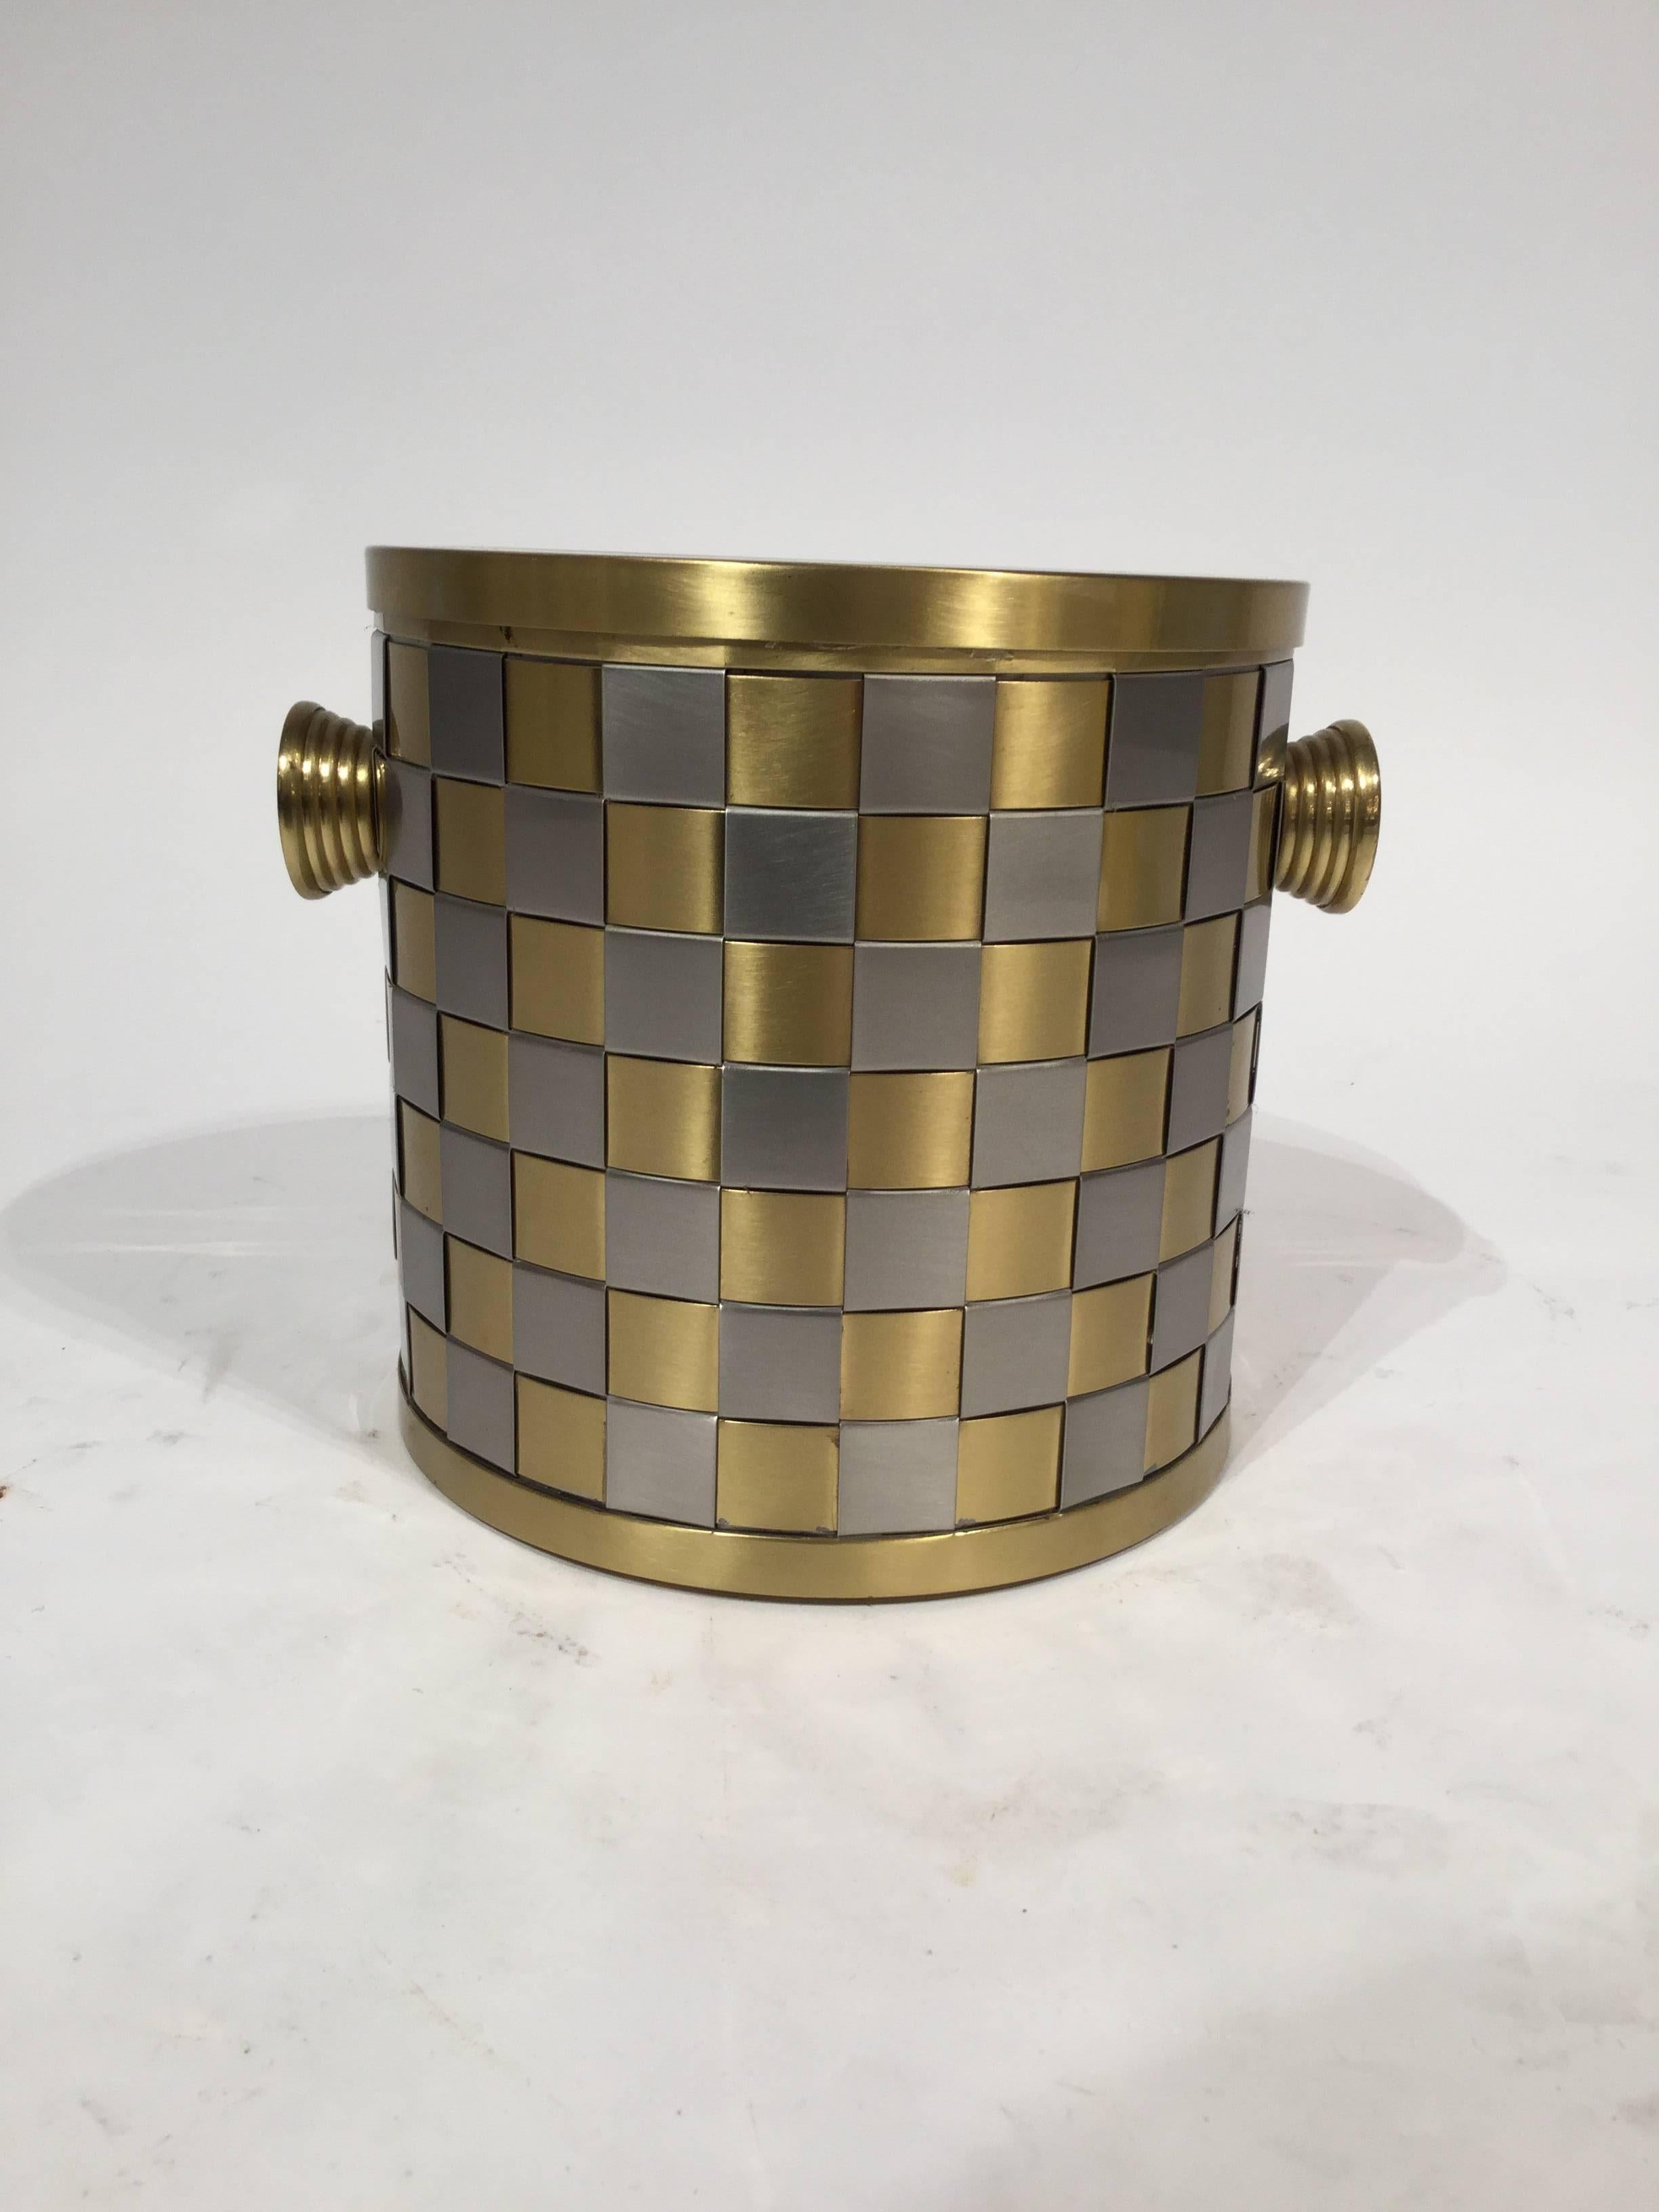 An Italian designed ice bucket in interwoven brass and brushed steel squares, circa 1970.